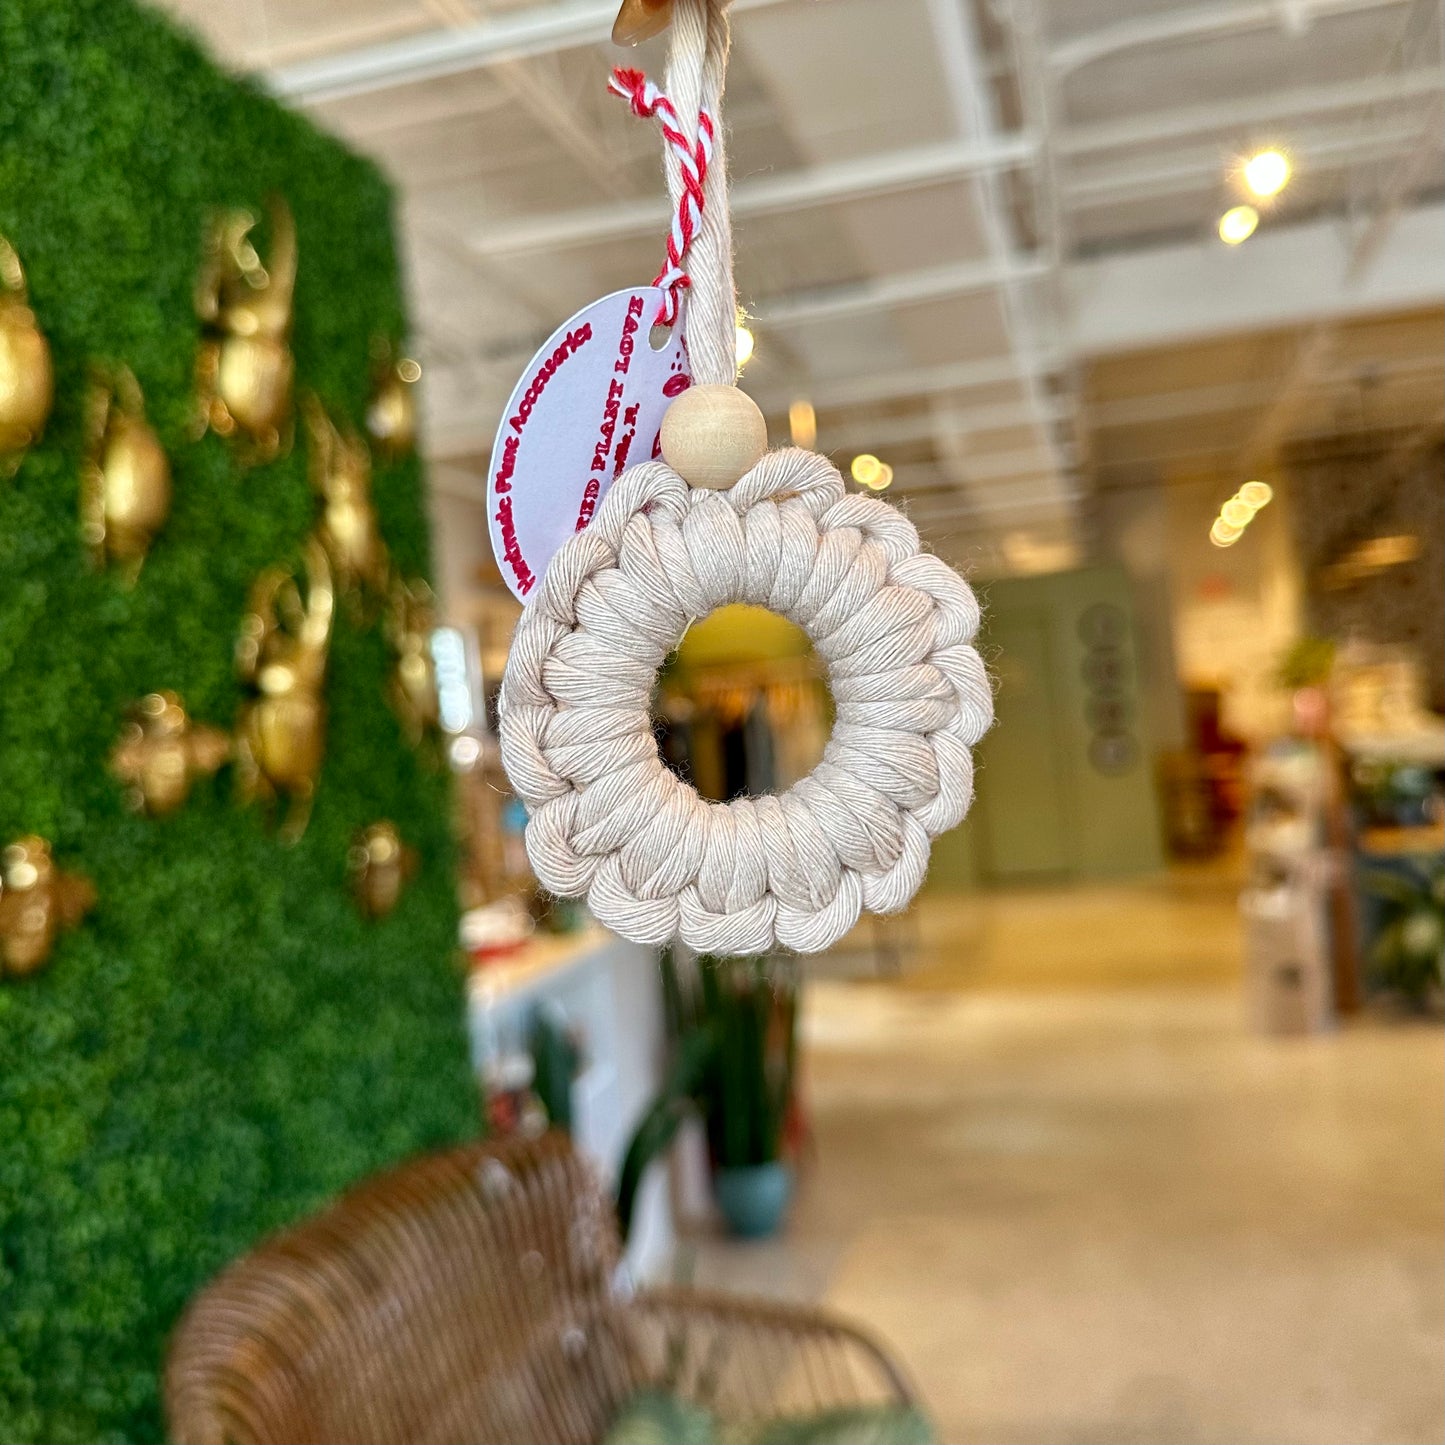 Elevated Plant Love Macrame Ornaments